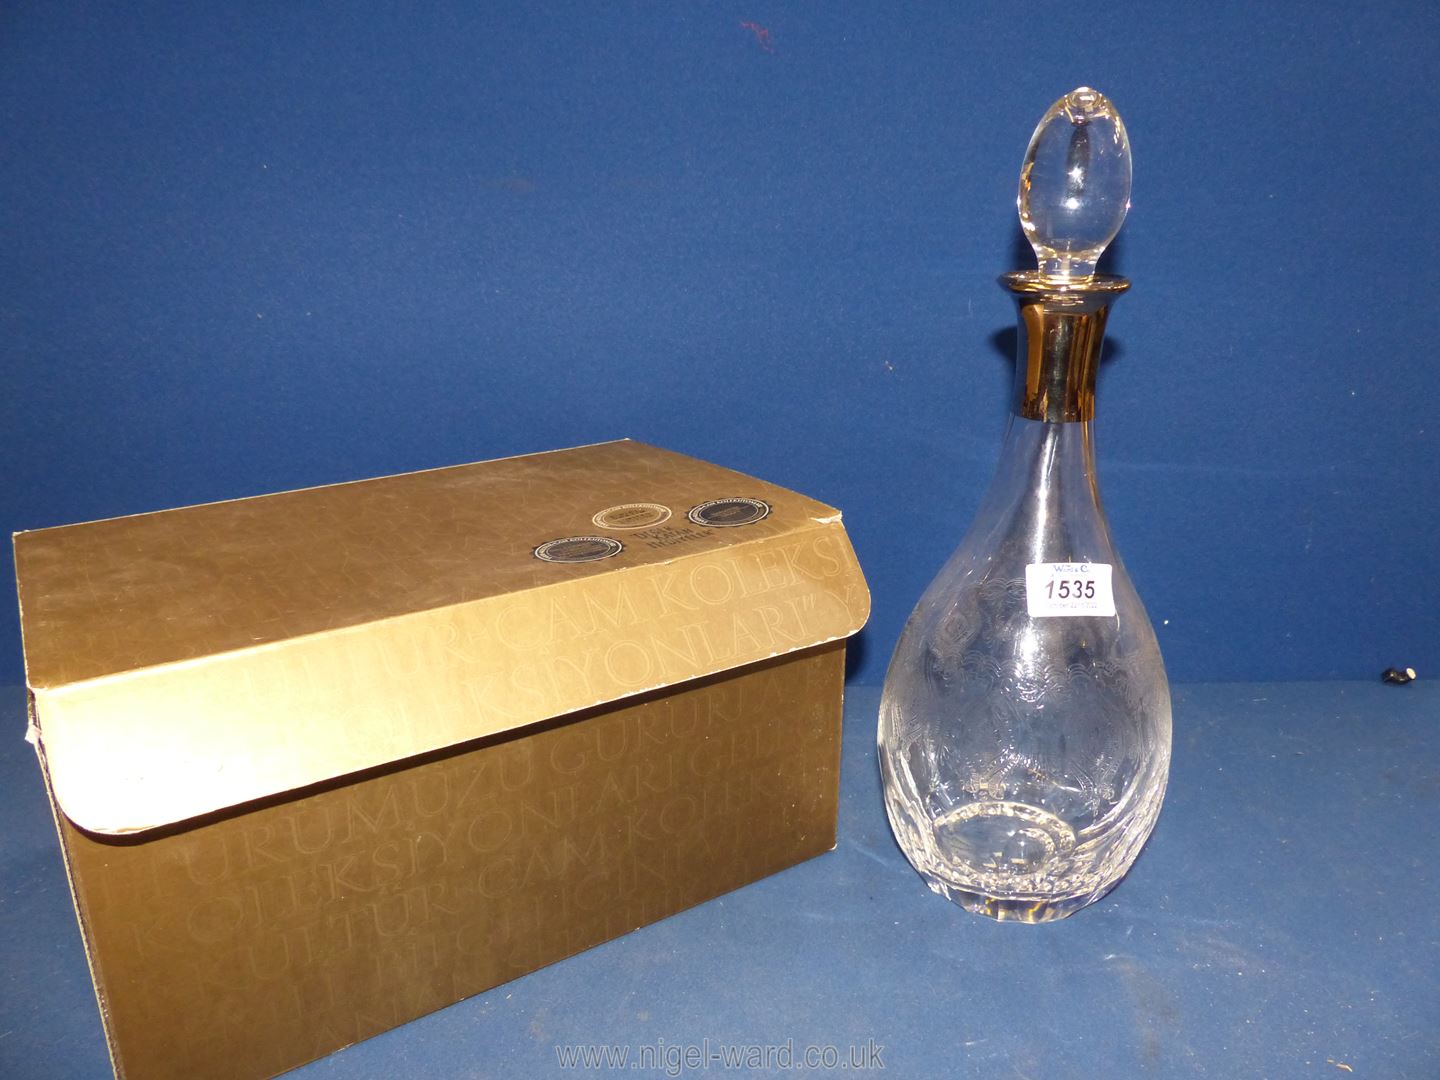 A limited edition Turkish/Cypriot glass decanter with etched design and white metal collar, boxed, - Image 2 of 2